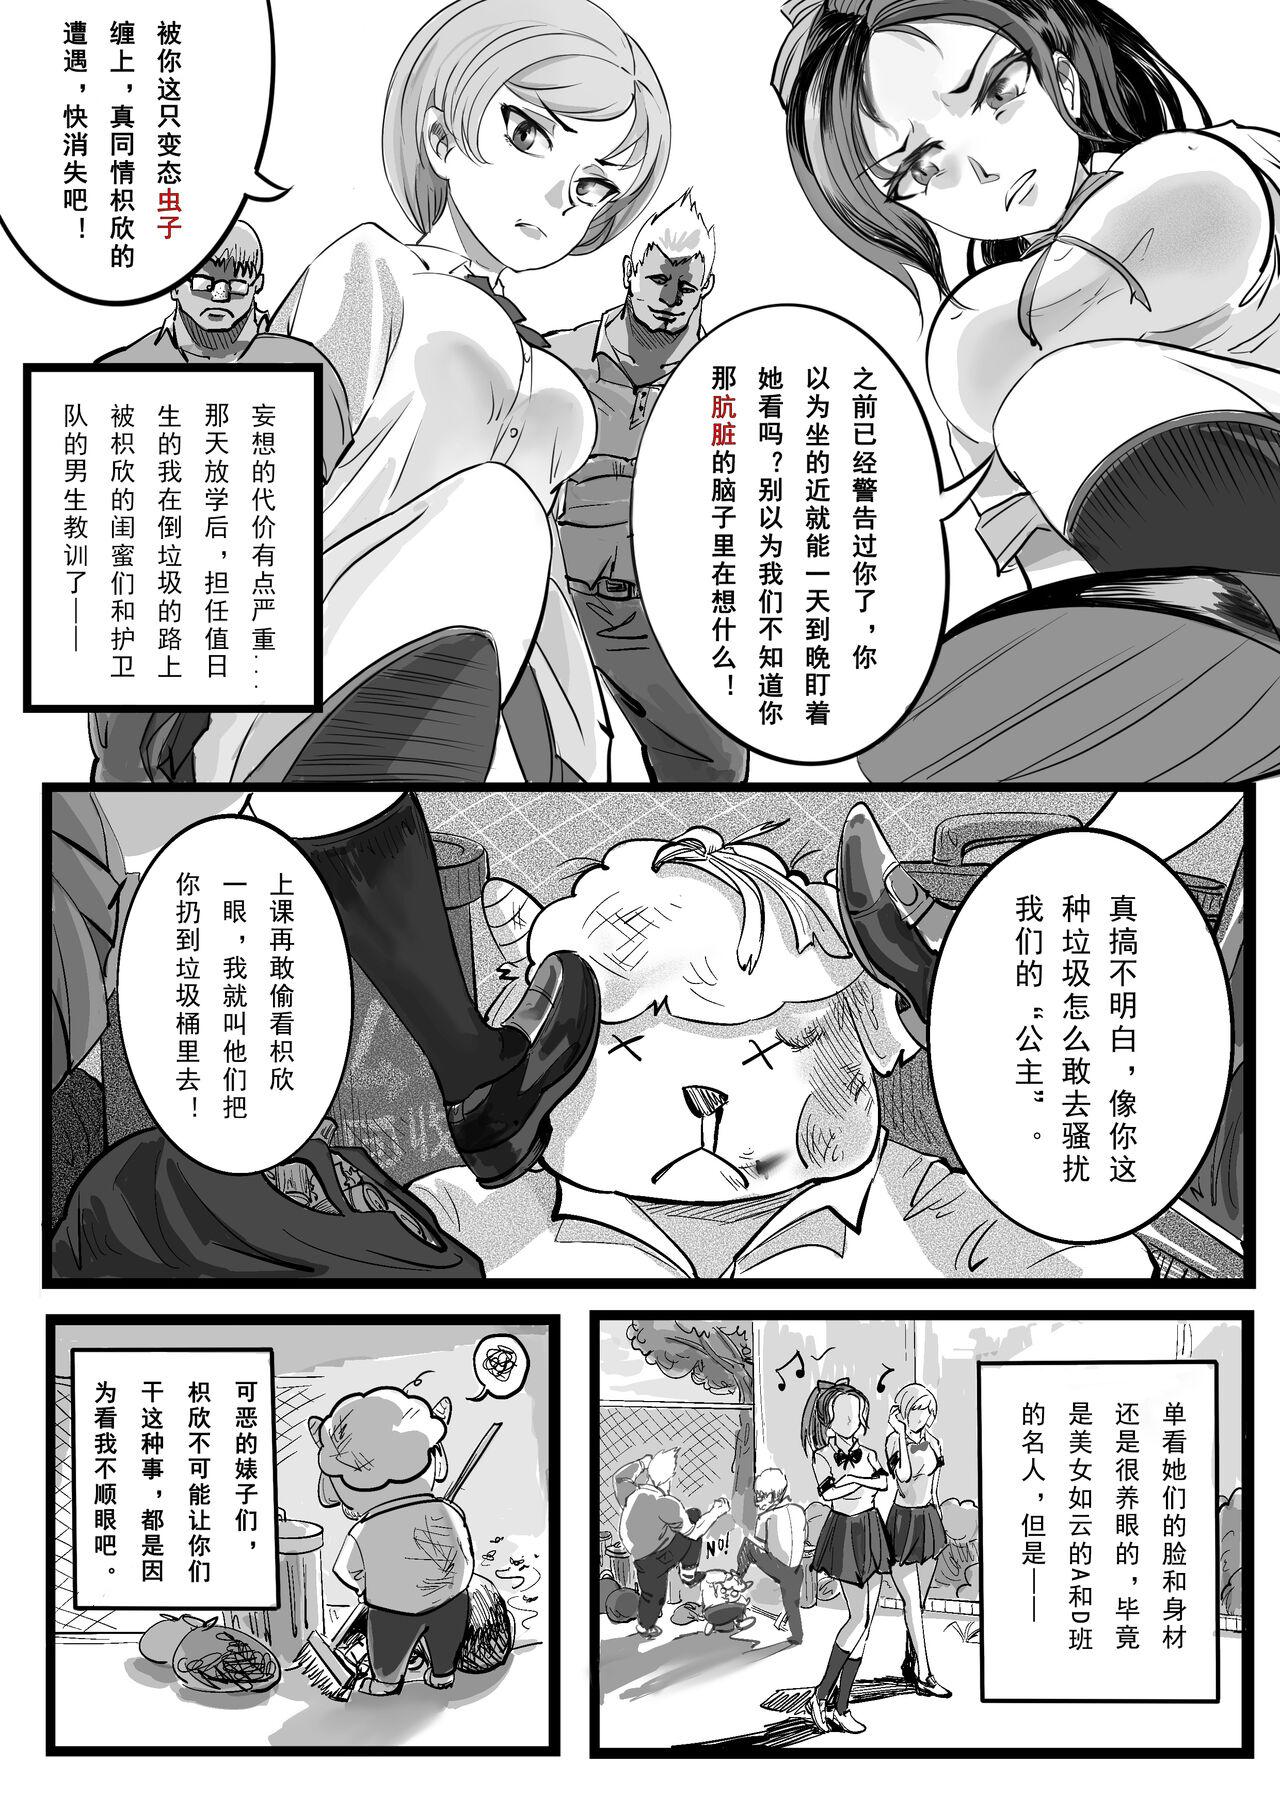 Eurobabe GOAT-goat chapter 2 - Original Foreplay - Page 2